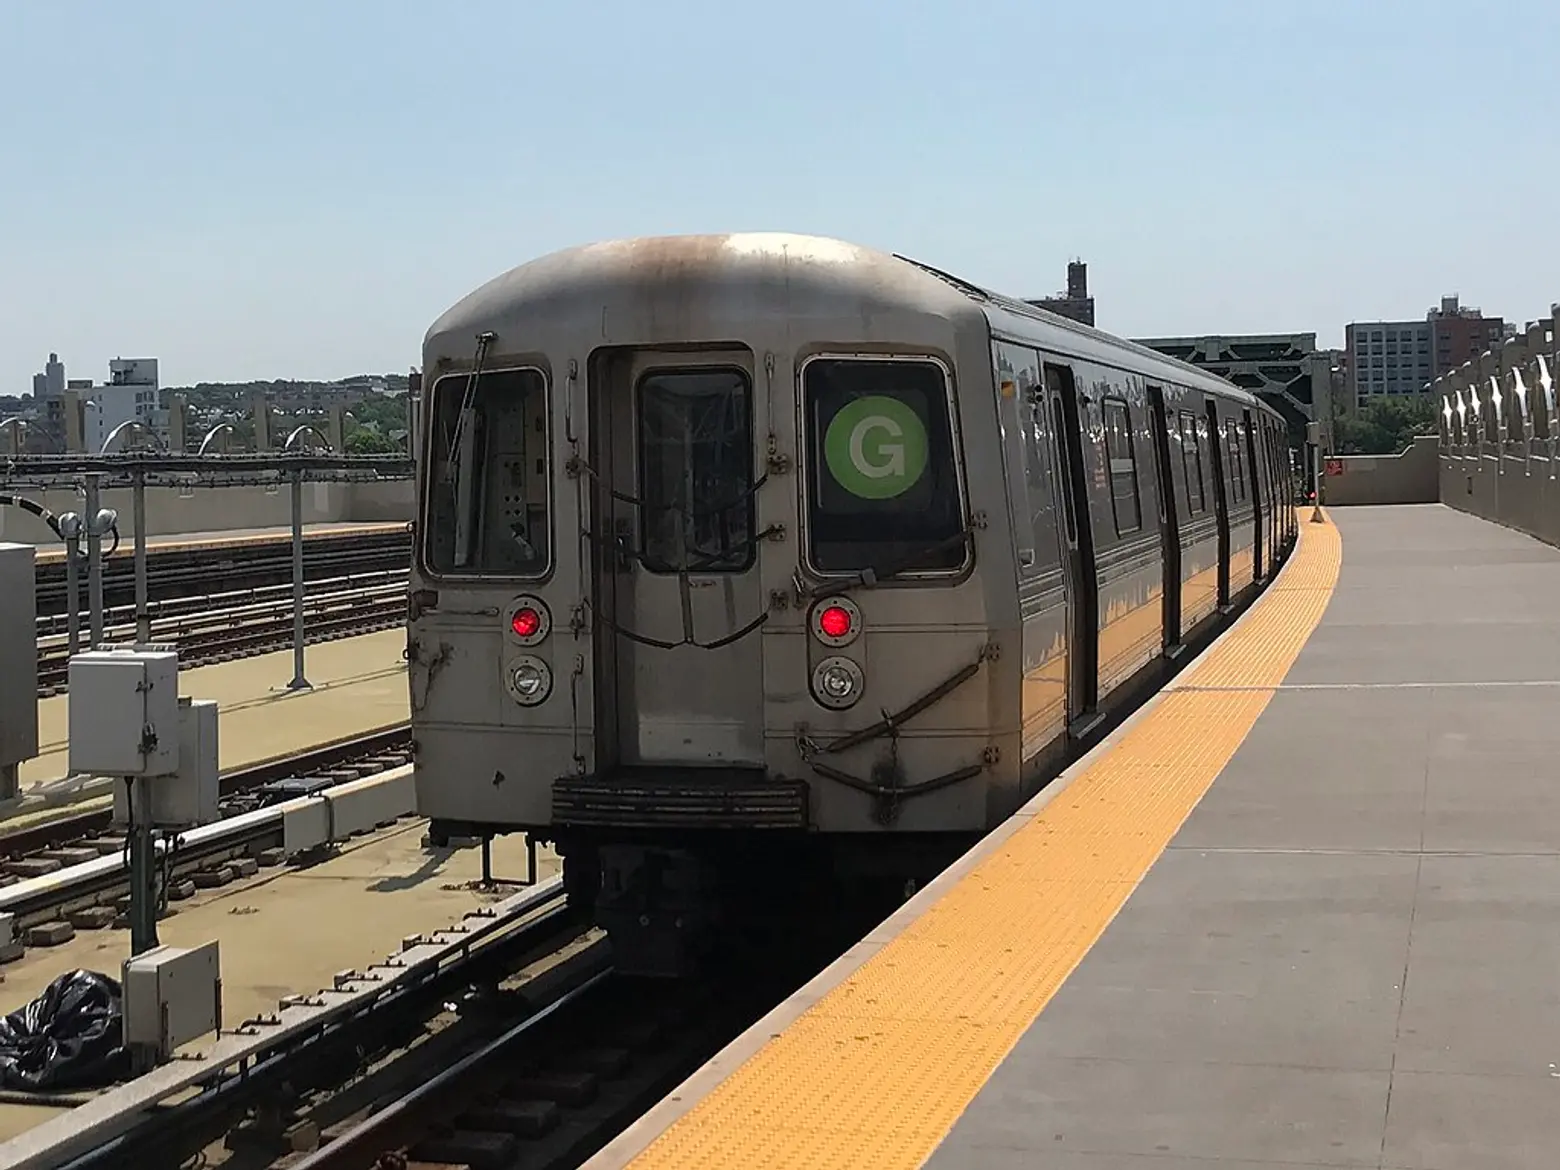 There will be no G-train service between Bed-Stuy and LIC every weekend in September